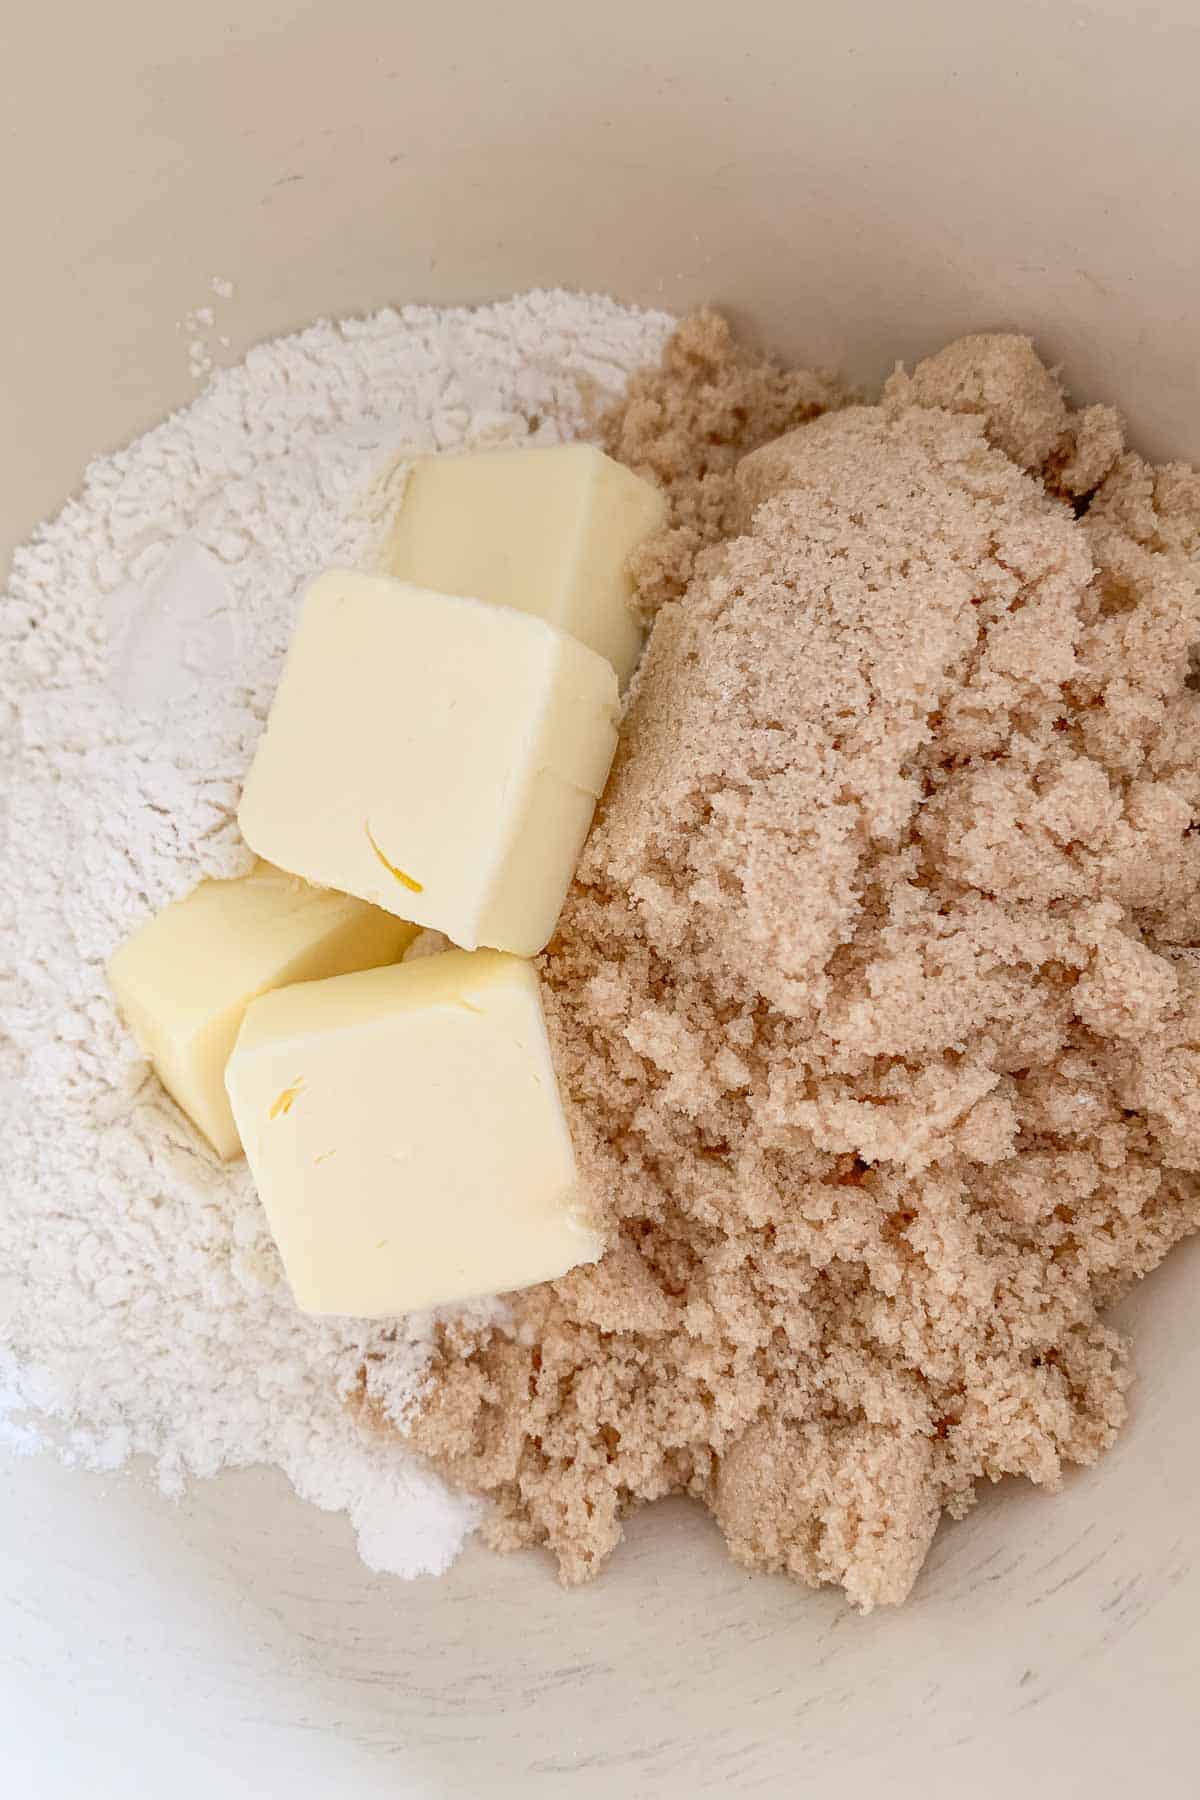 Flour, butter, and brown sugar in a mixing bowl.